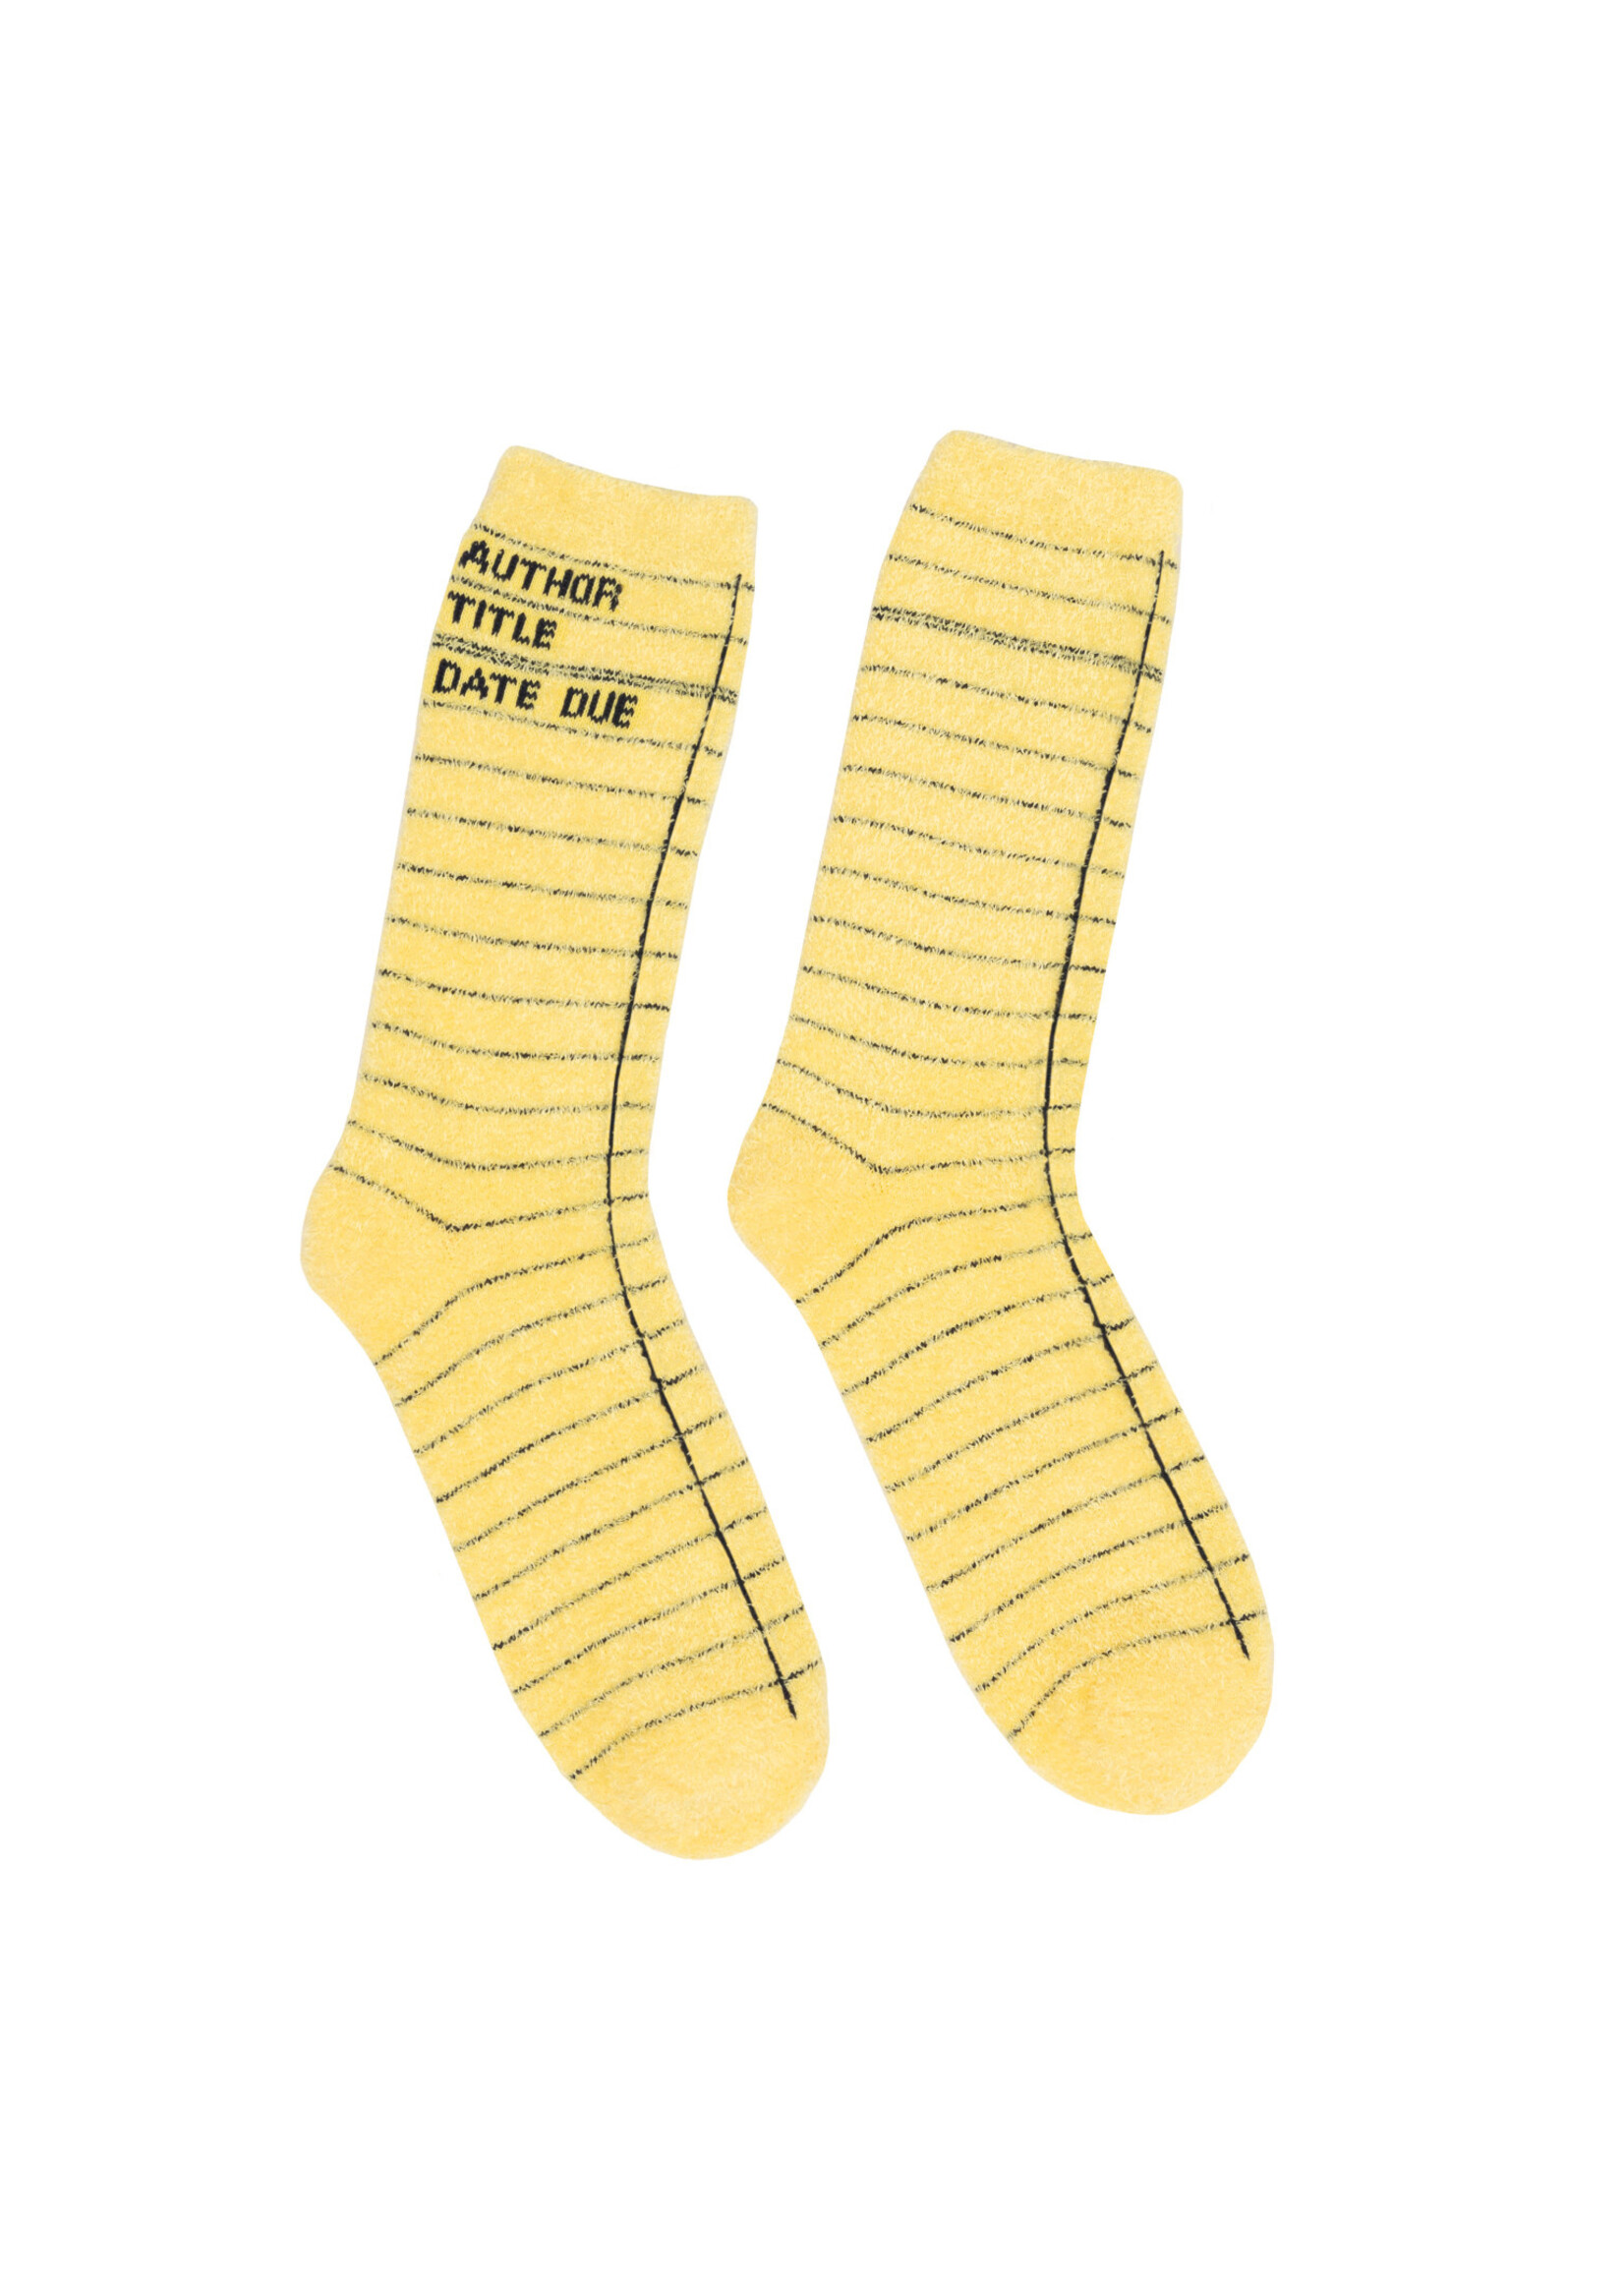 Out of Print Library Card Cozy Socks - Adult